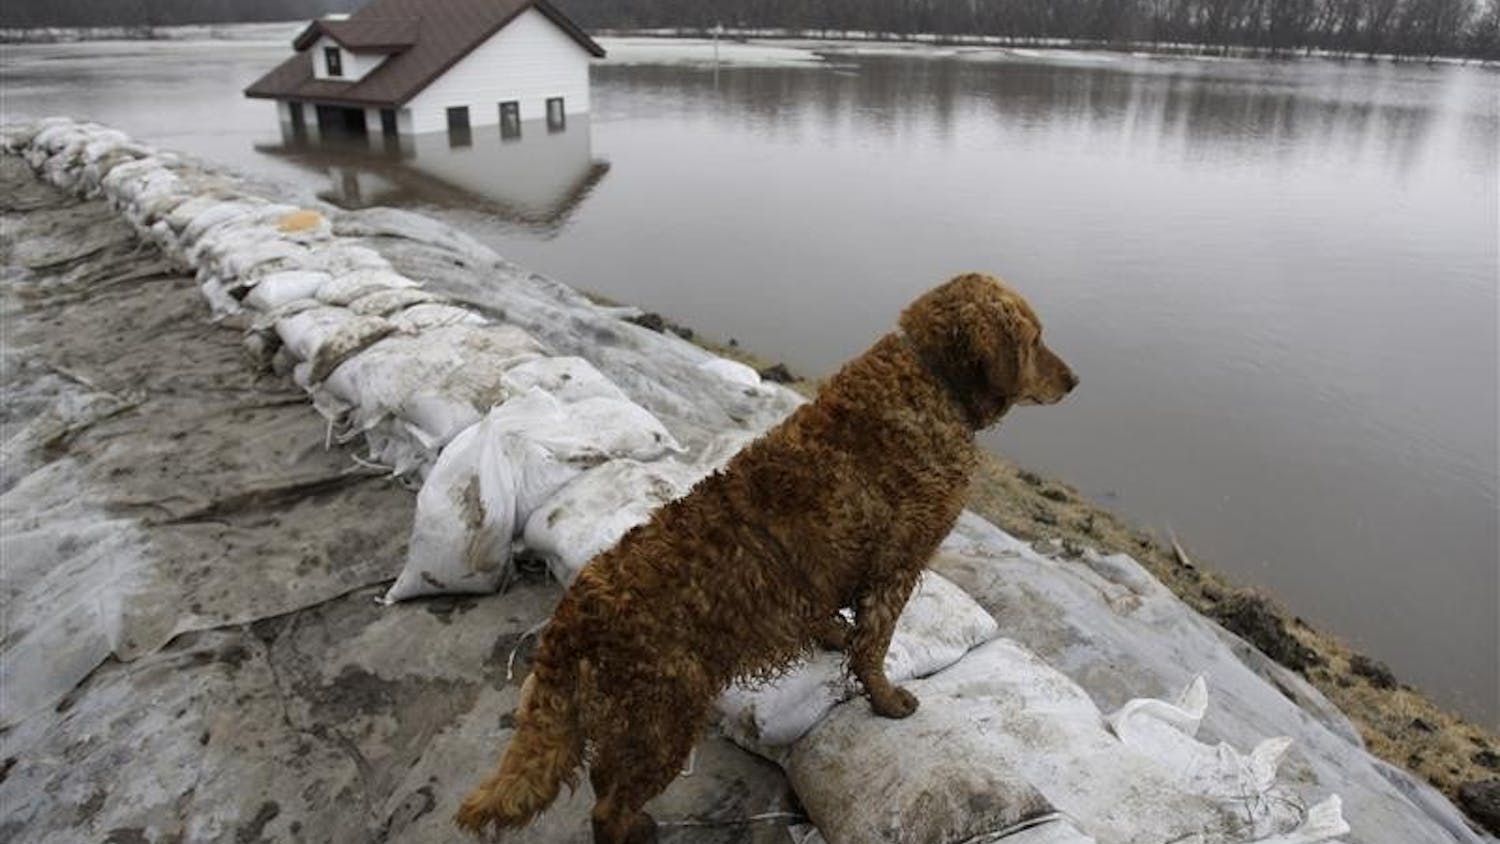 One of Doug Stensguard's dogs, Annie, looks out over what used to be a 5-acre yard and an out building that is now flooded by the rising Red River, Tuesday in Fargo, N.D. Stensguard built an earthen and sandbag dike around his home in the hope of holding back the rising floodwater from the Red River.